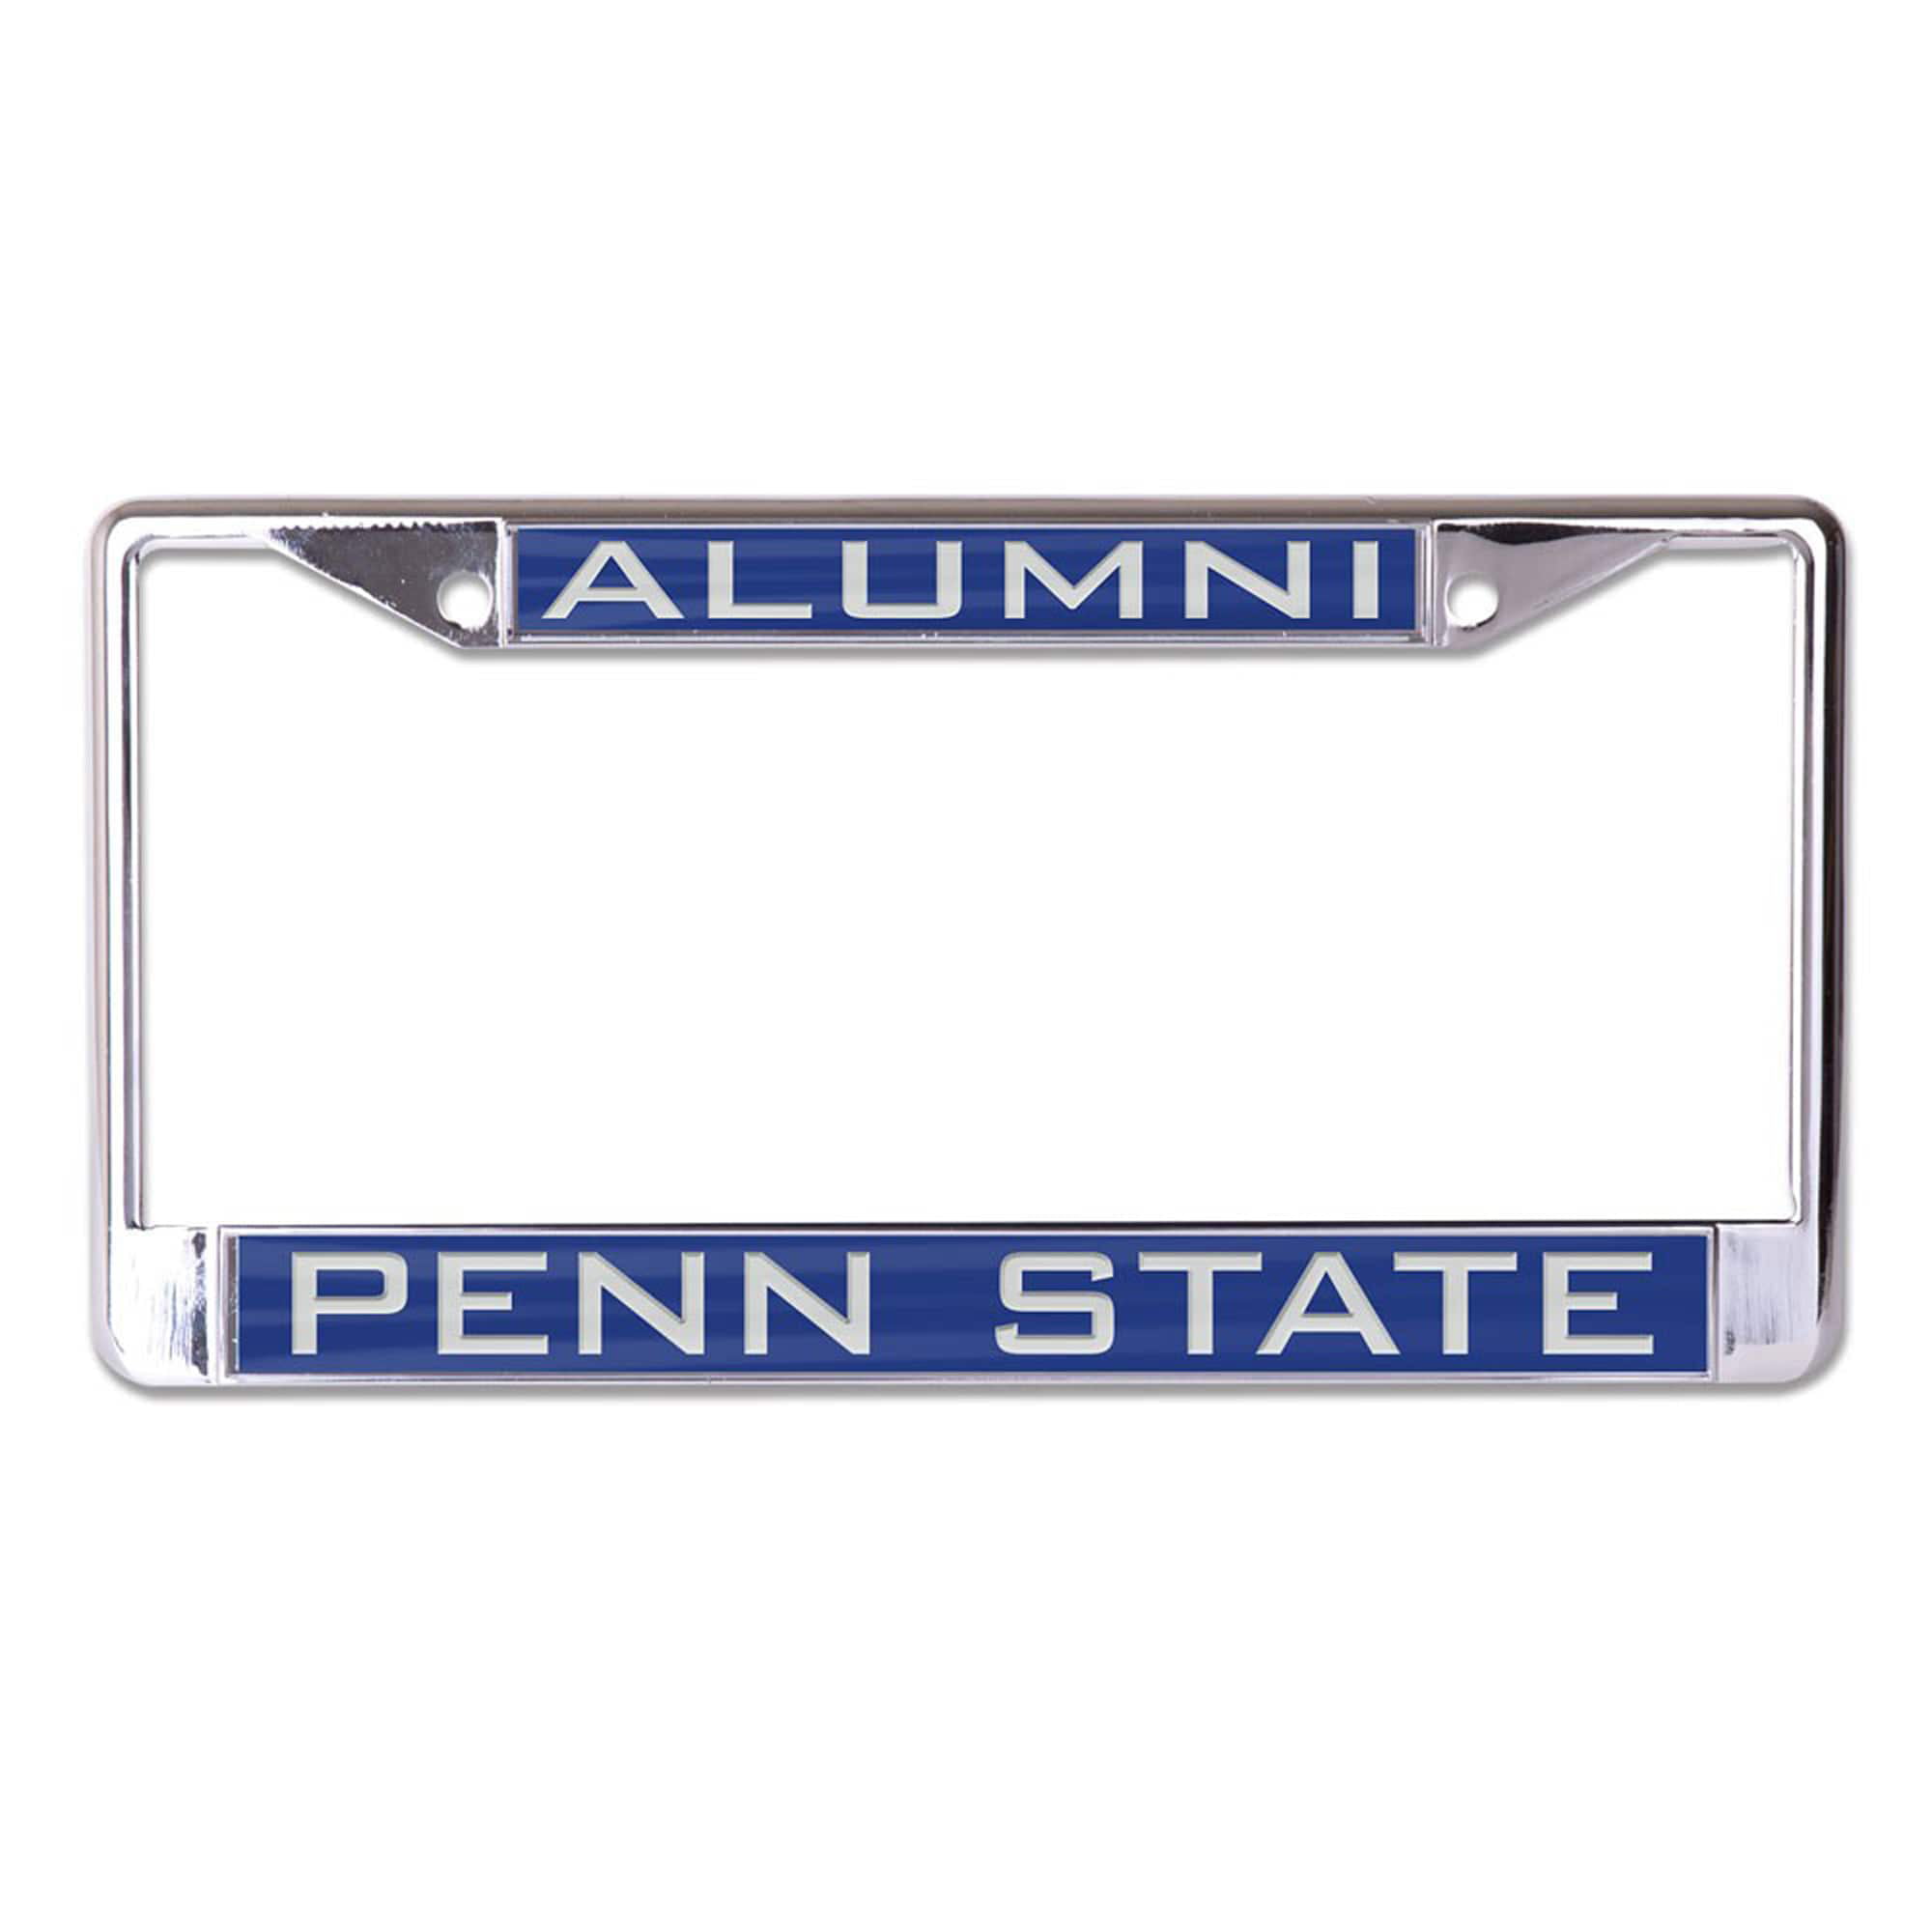 Two Officially Licensed NCAA License Plate Screw Caps Penn State Nittany Lions